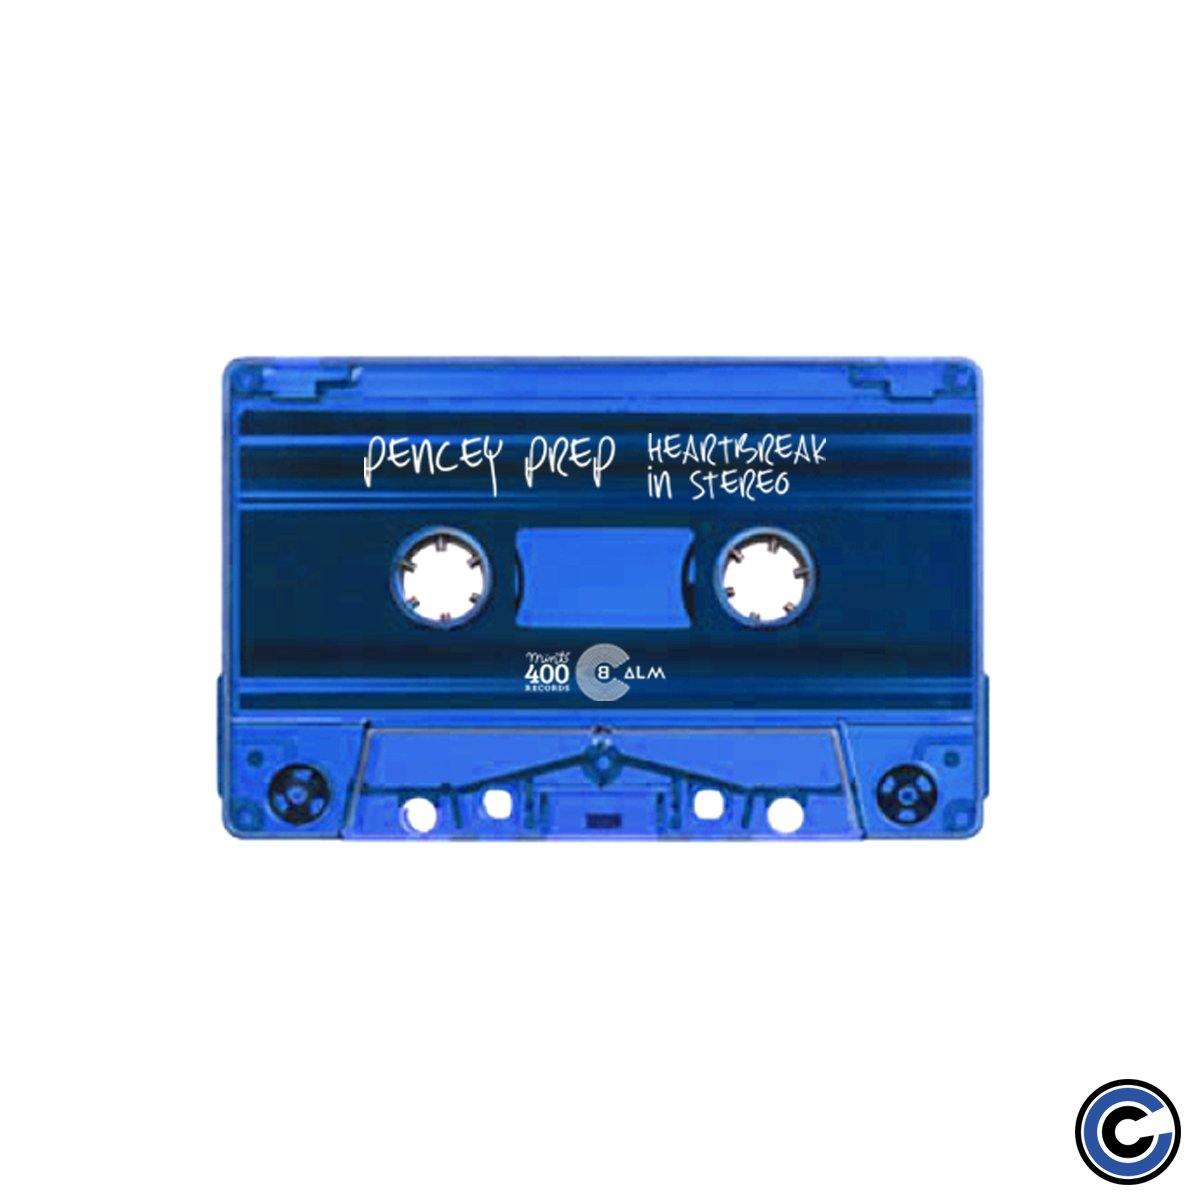 Buy – Pencey Prep "Heartbreak In Stereo" Cassette – Band & Music Merch – Cold Cuts Merch